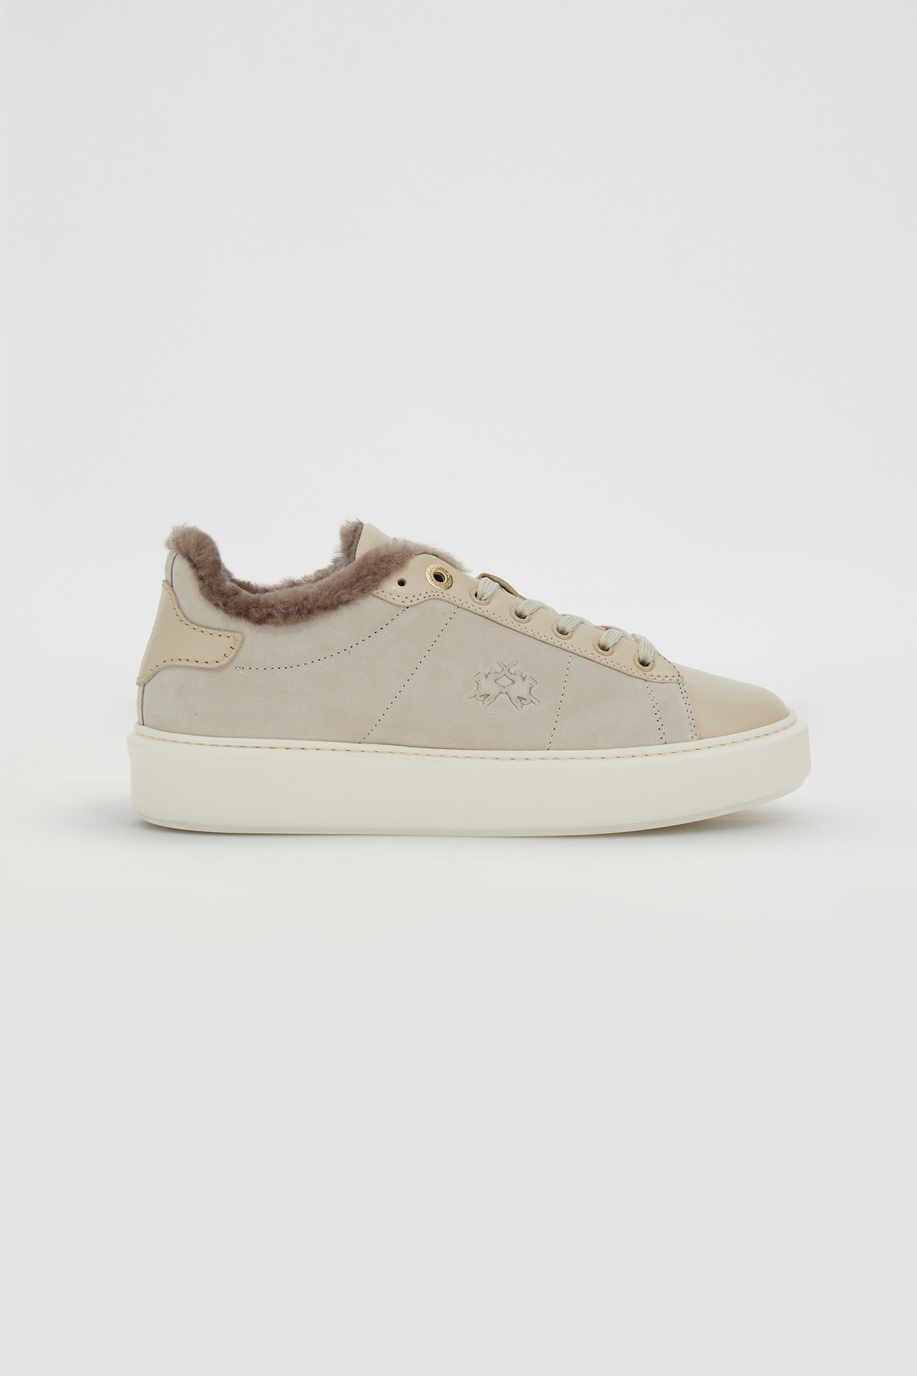 Women's trainers with inner lining - New Arrivals Women | La Martina - Official Online Shop